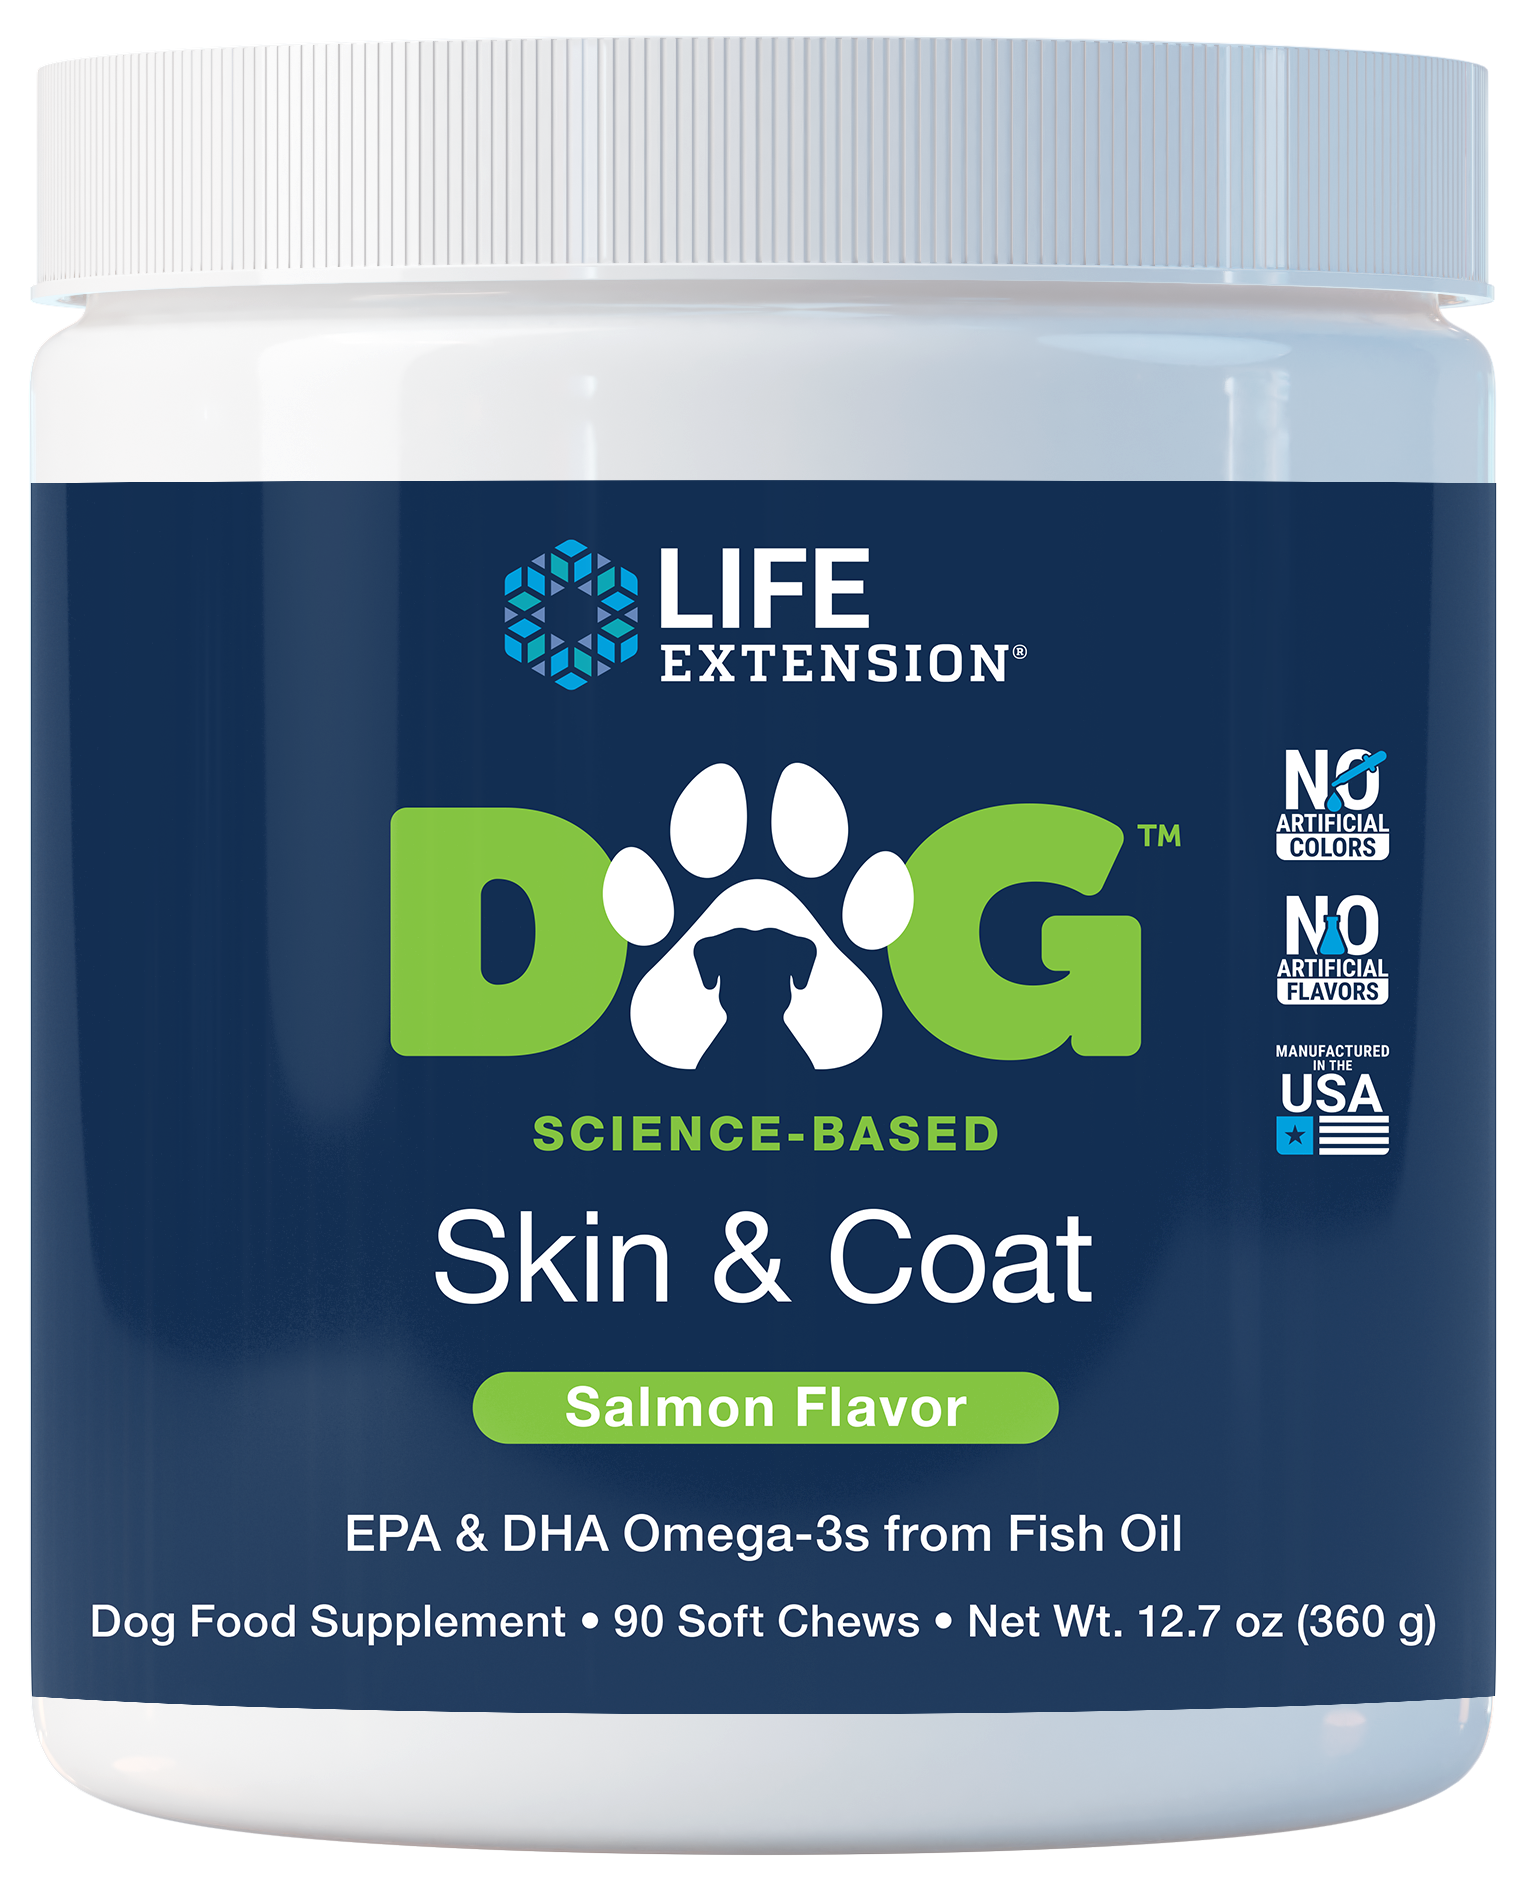 DOG Skin & Coat, 90 soft chews with tasty salmon flavor for healthy fur and relief of skin discomfort